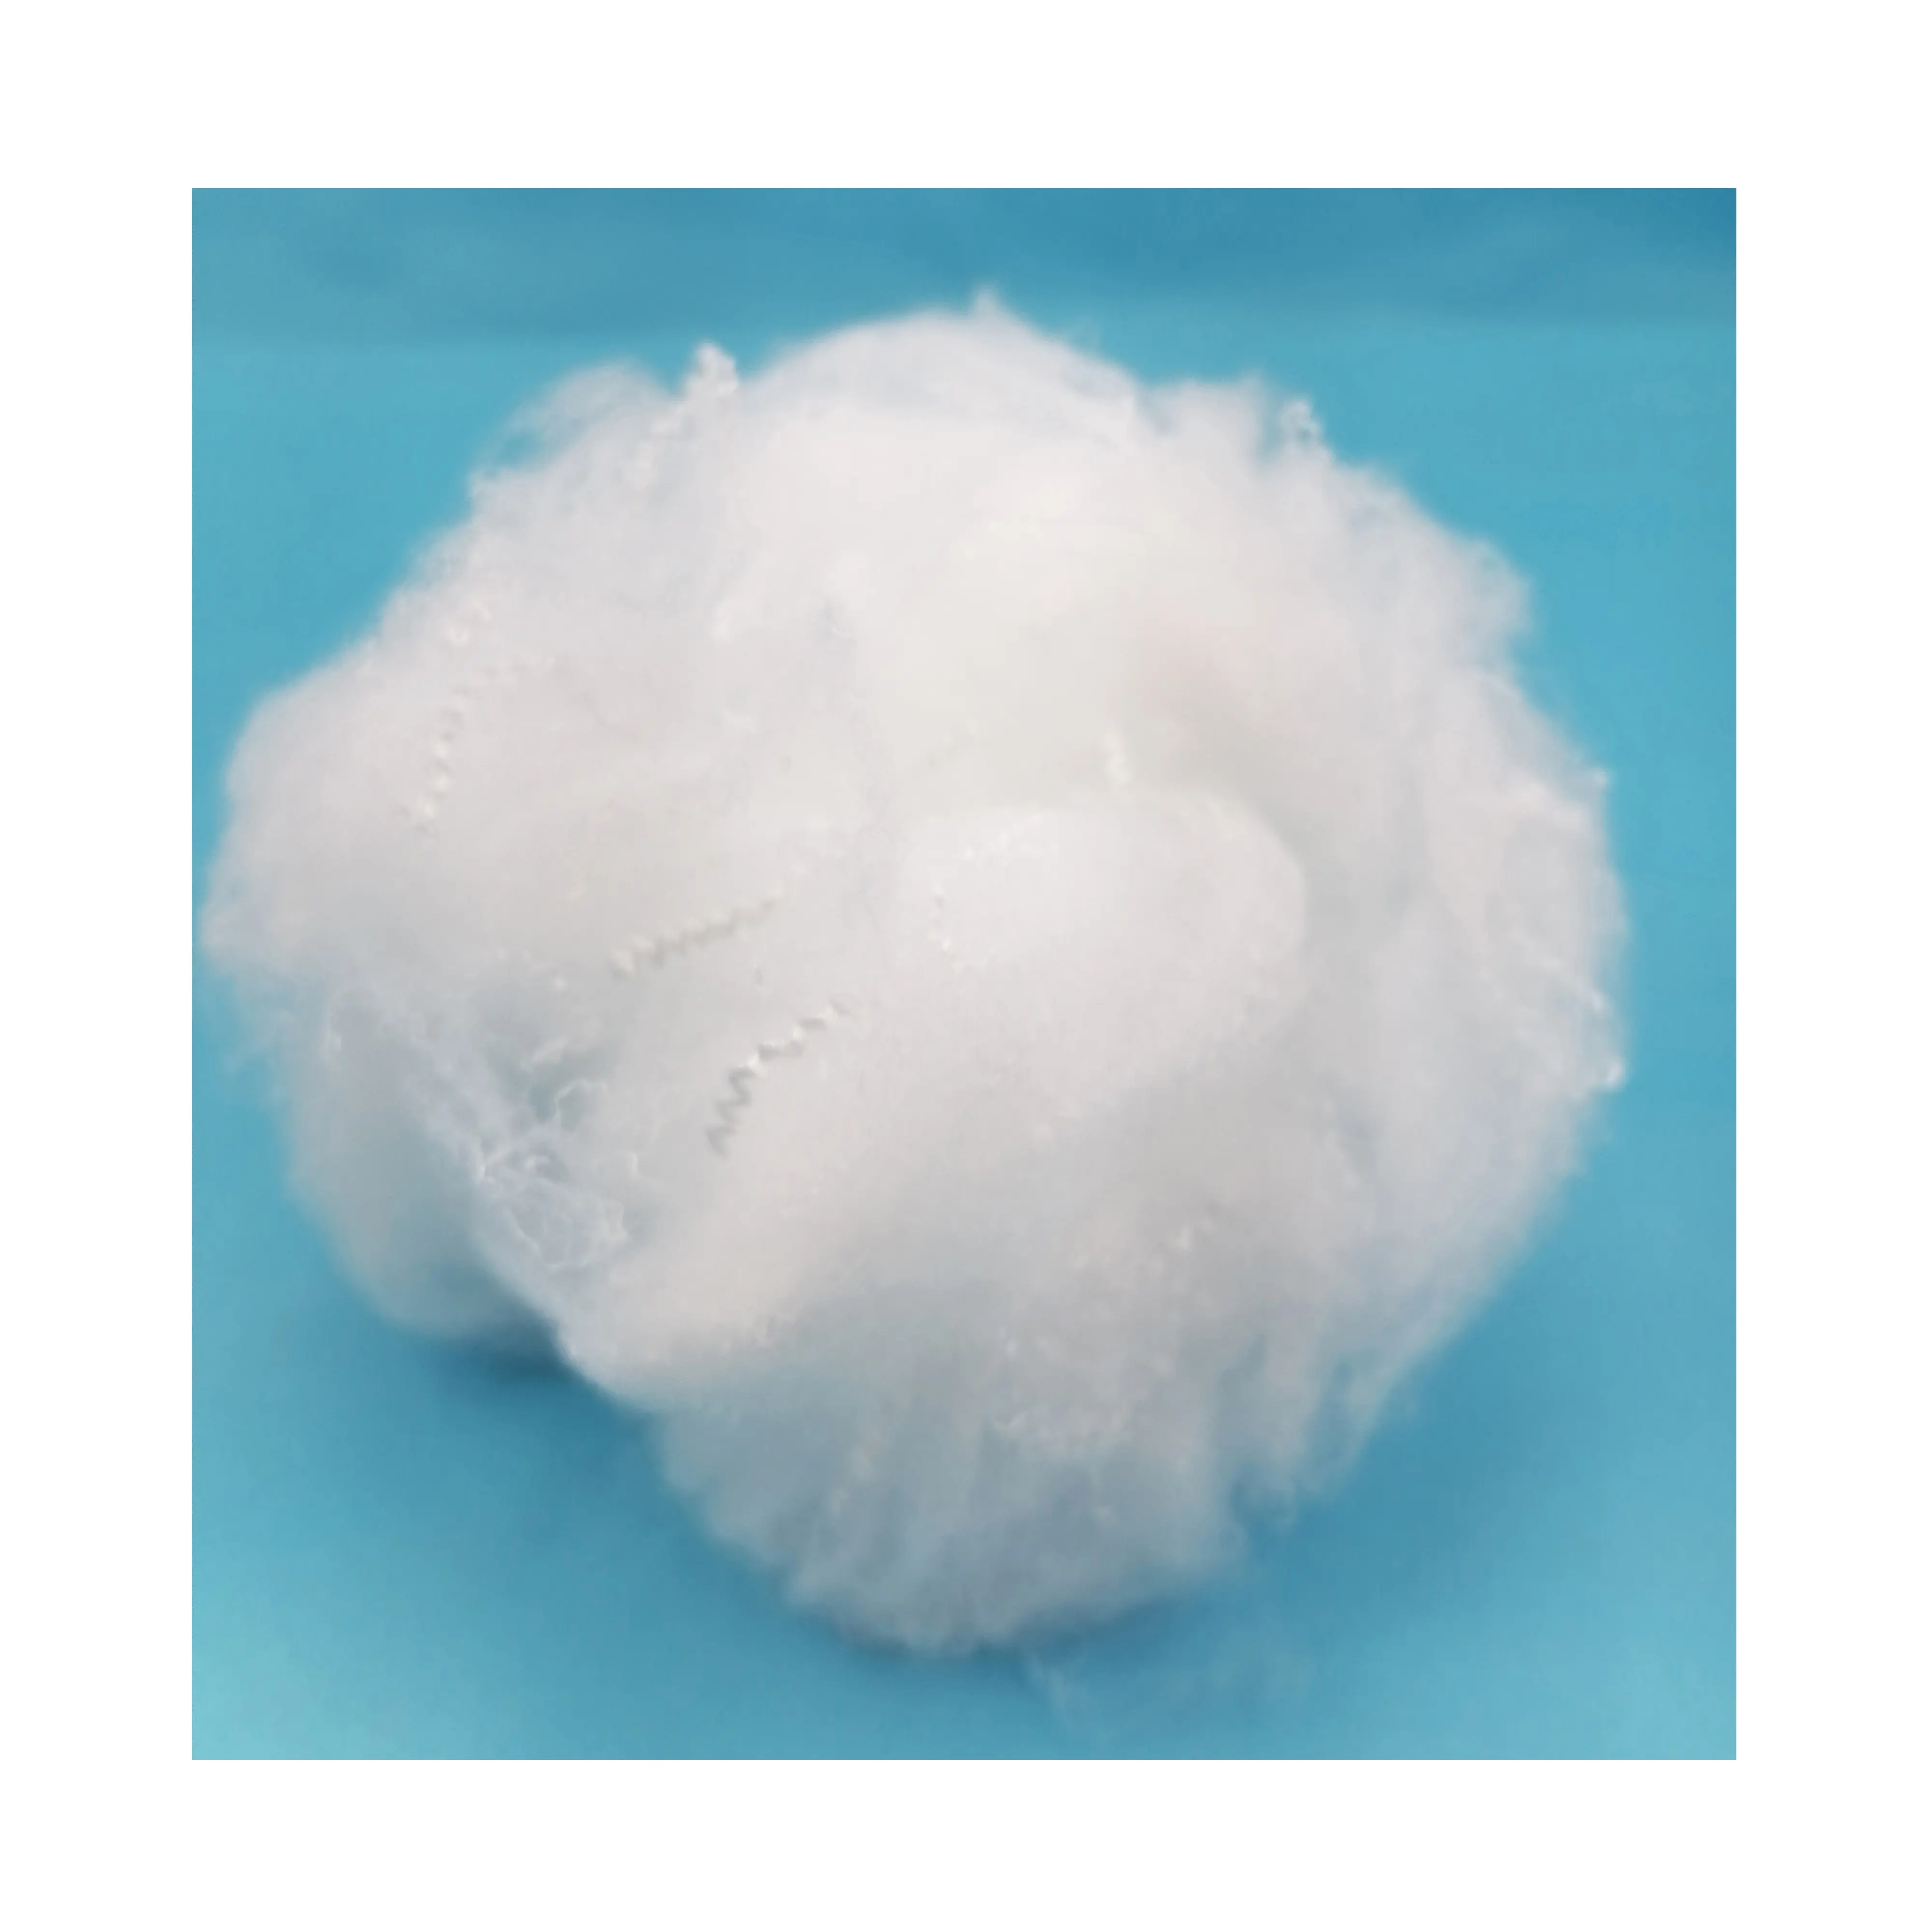 Siliconized Gel Fiber 0.7D for pillow